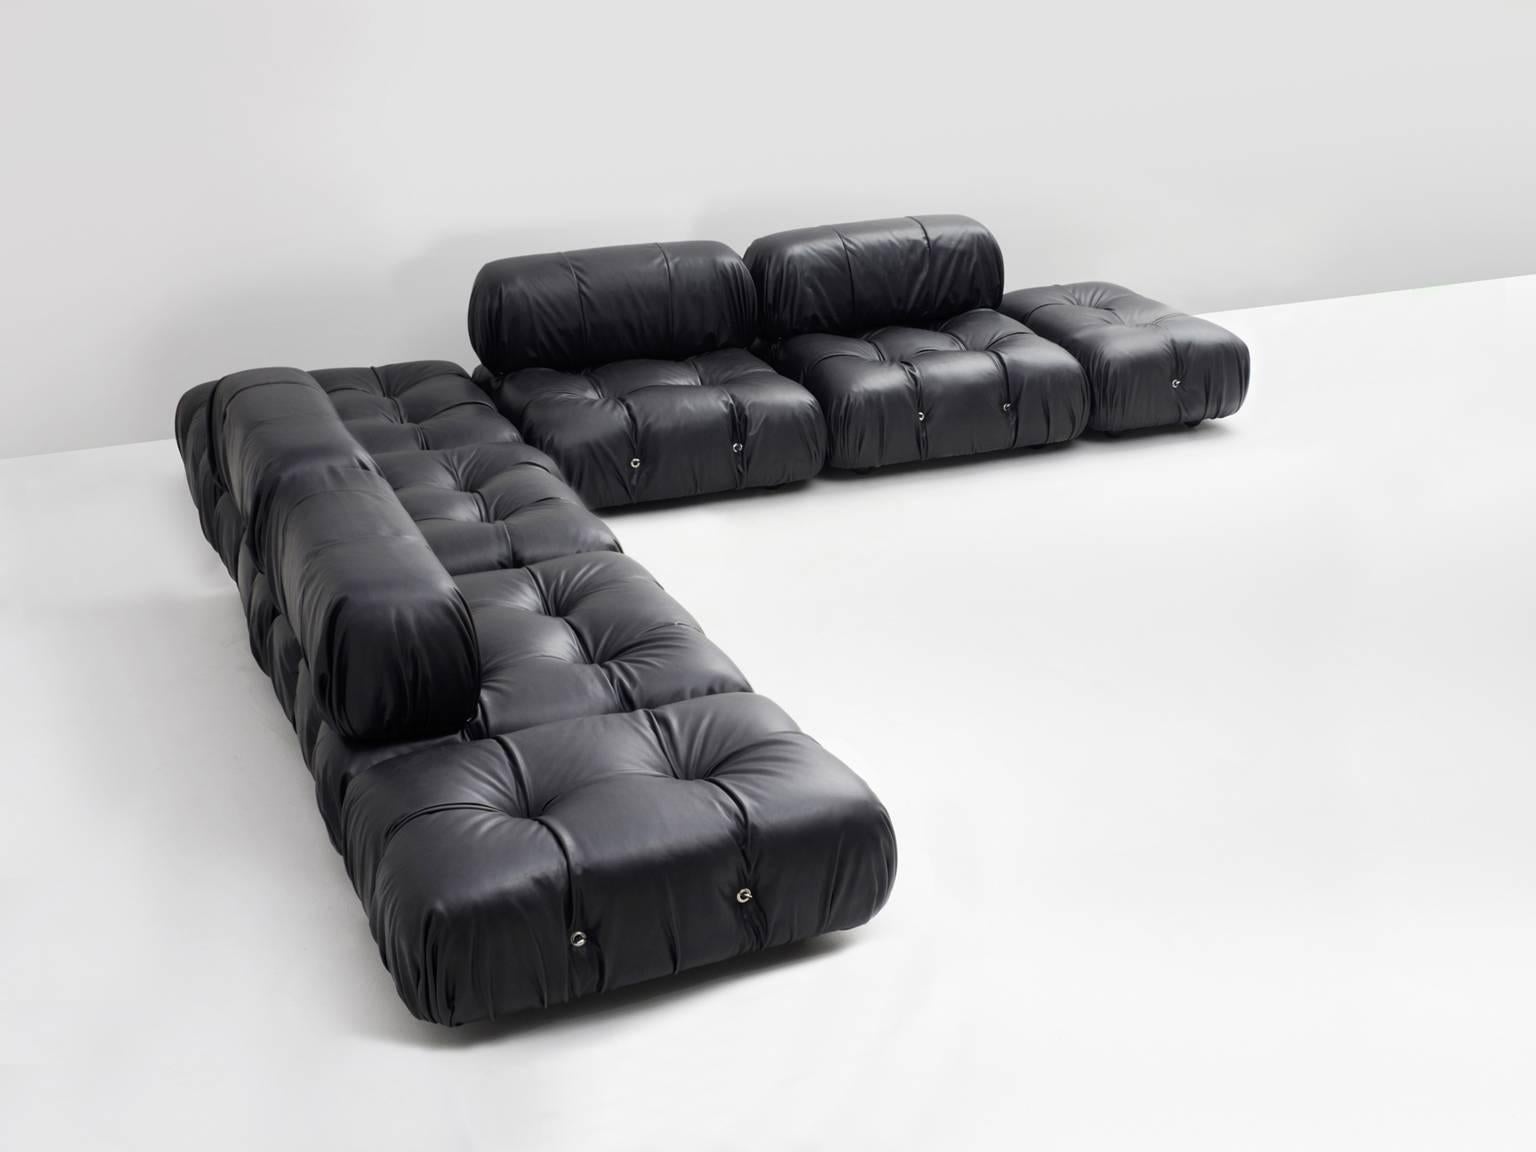 Large modular 'Cameleonda' sofa, in black leather upholstery, by Mario Bellini for C&B Italia, Italy 1972. 

The sectional elements this sofa was made with, can be used freely and apart from one another. The backs and armrests are provided with